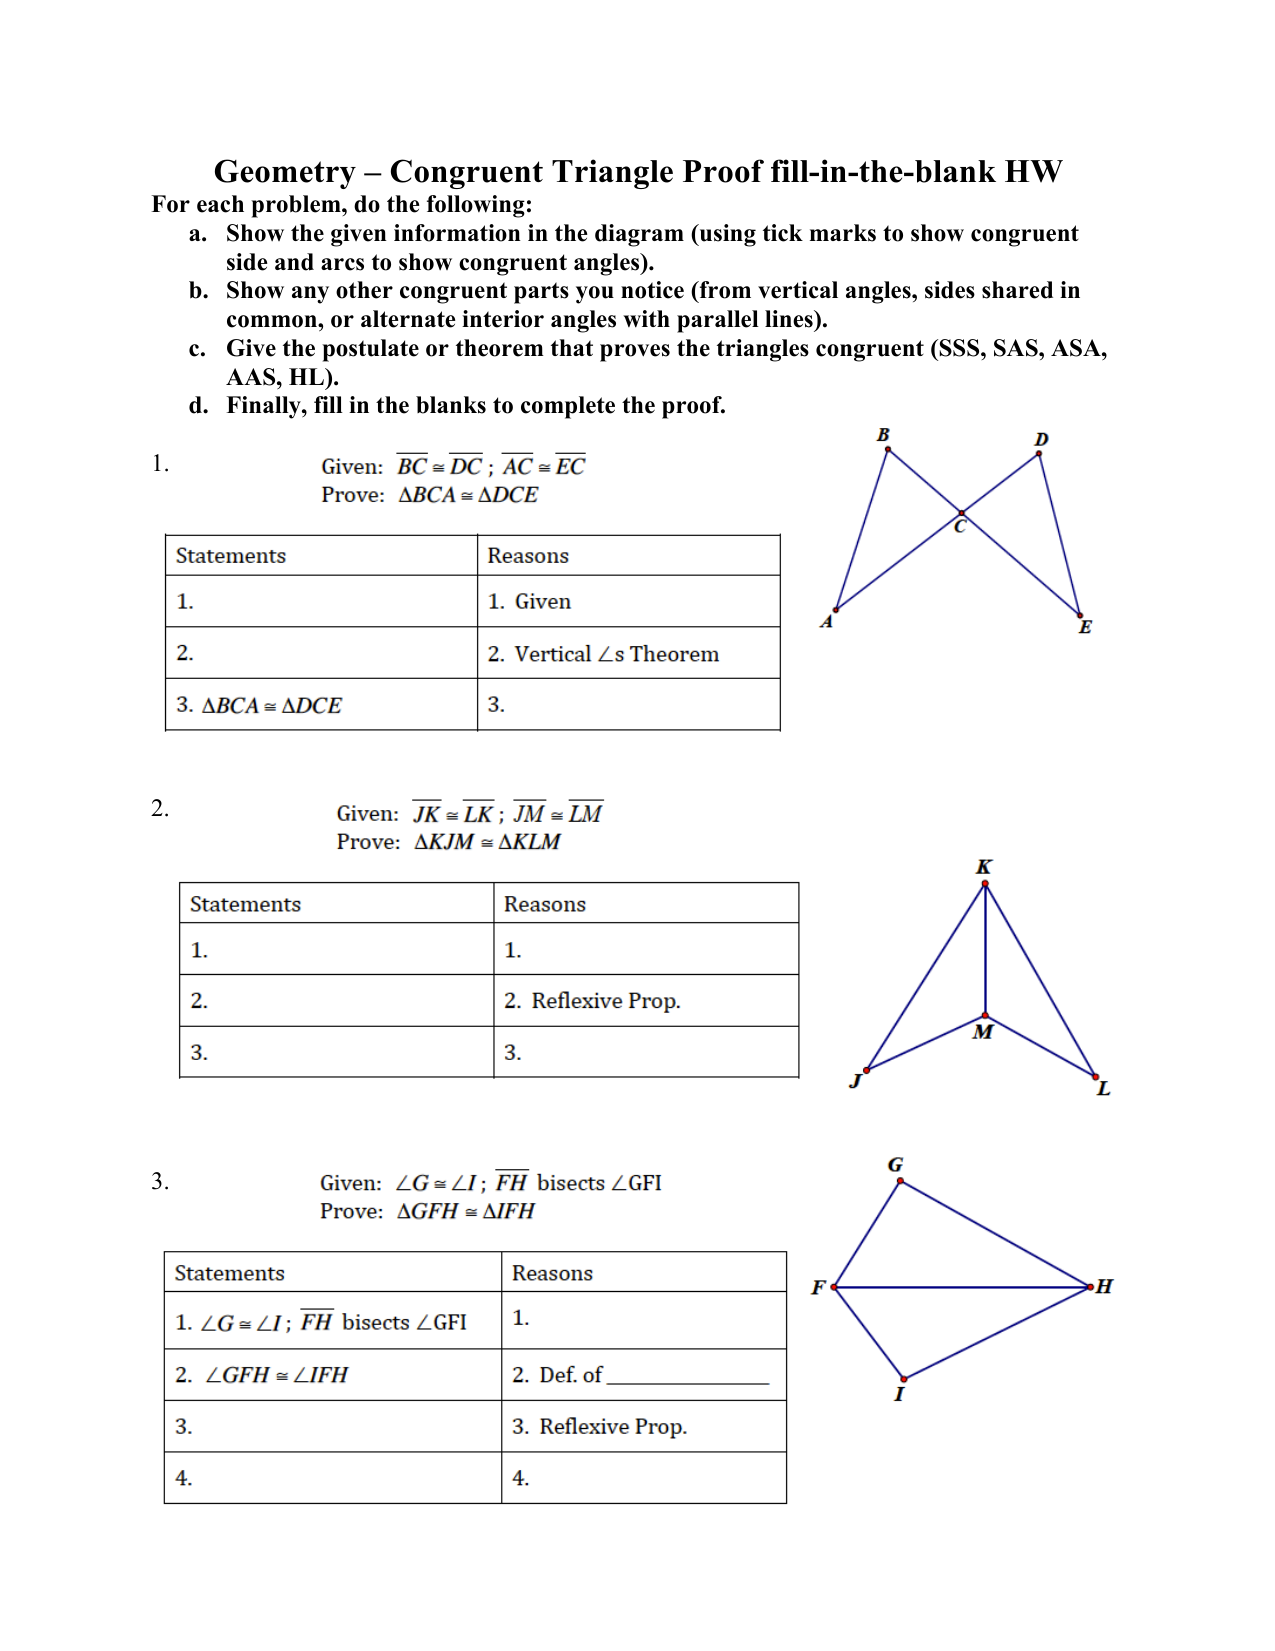 Geometry – Congruent Triangle Proof fill-in-the-blank Regarding Proving Triangles Congruent Worksheet